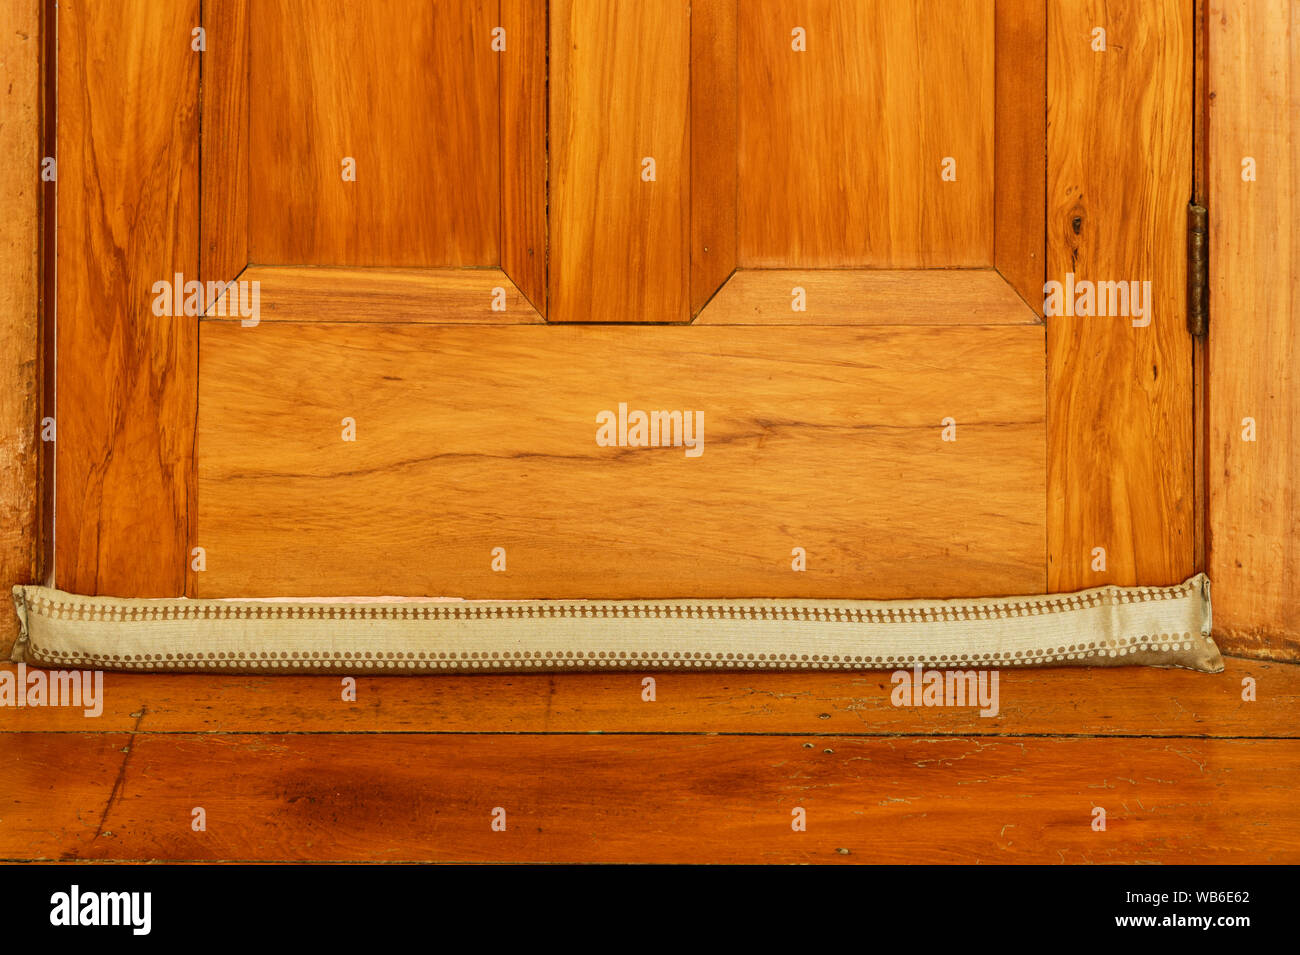 A material draught stopper used to prevent drafts in winter, on a wooden floor Stock Photo